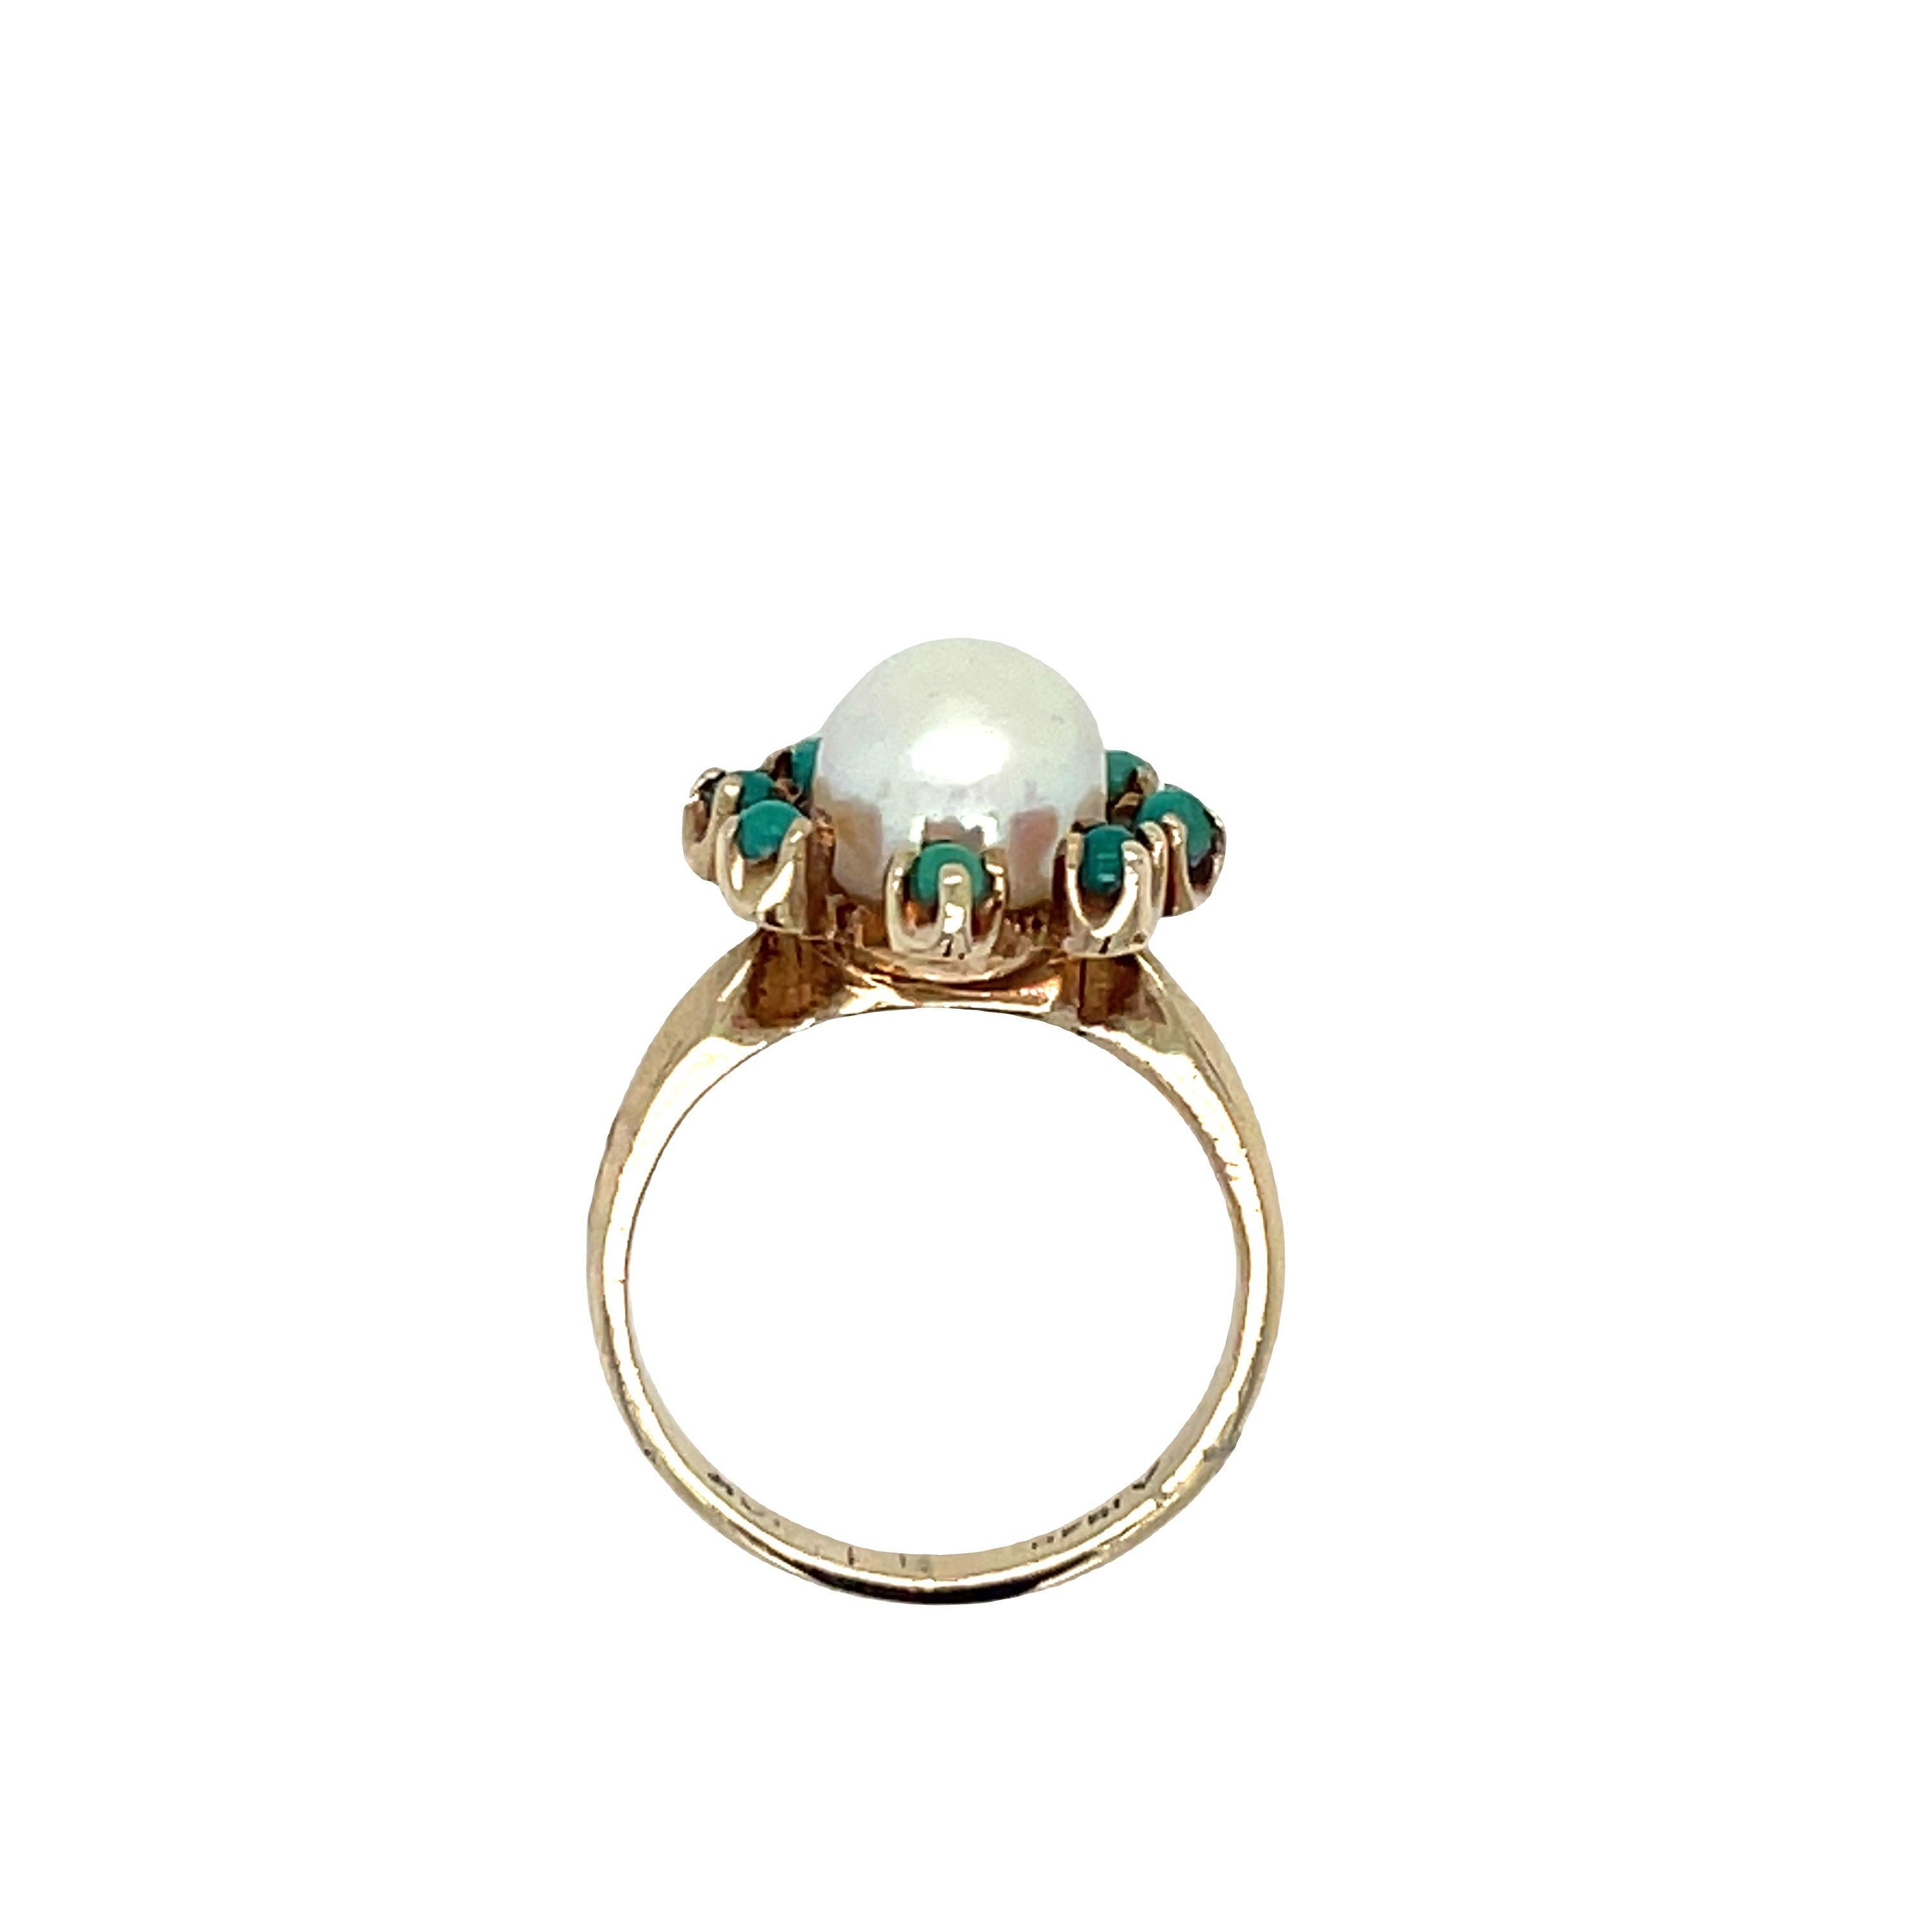 Beautiful antique ring crafted in 10k yellow gold. This lovely piece showcases a center pearl surrounded by eight small round turquoises in a cluster-style setting.
The vintage ring features a cultured pearl measuring 5.8 mm, elegantly encircled by